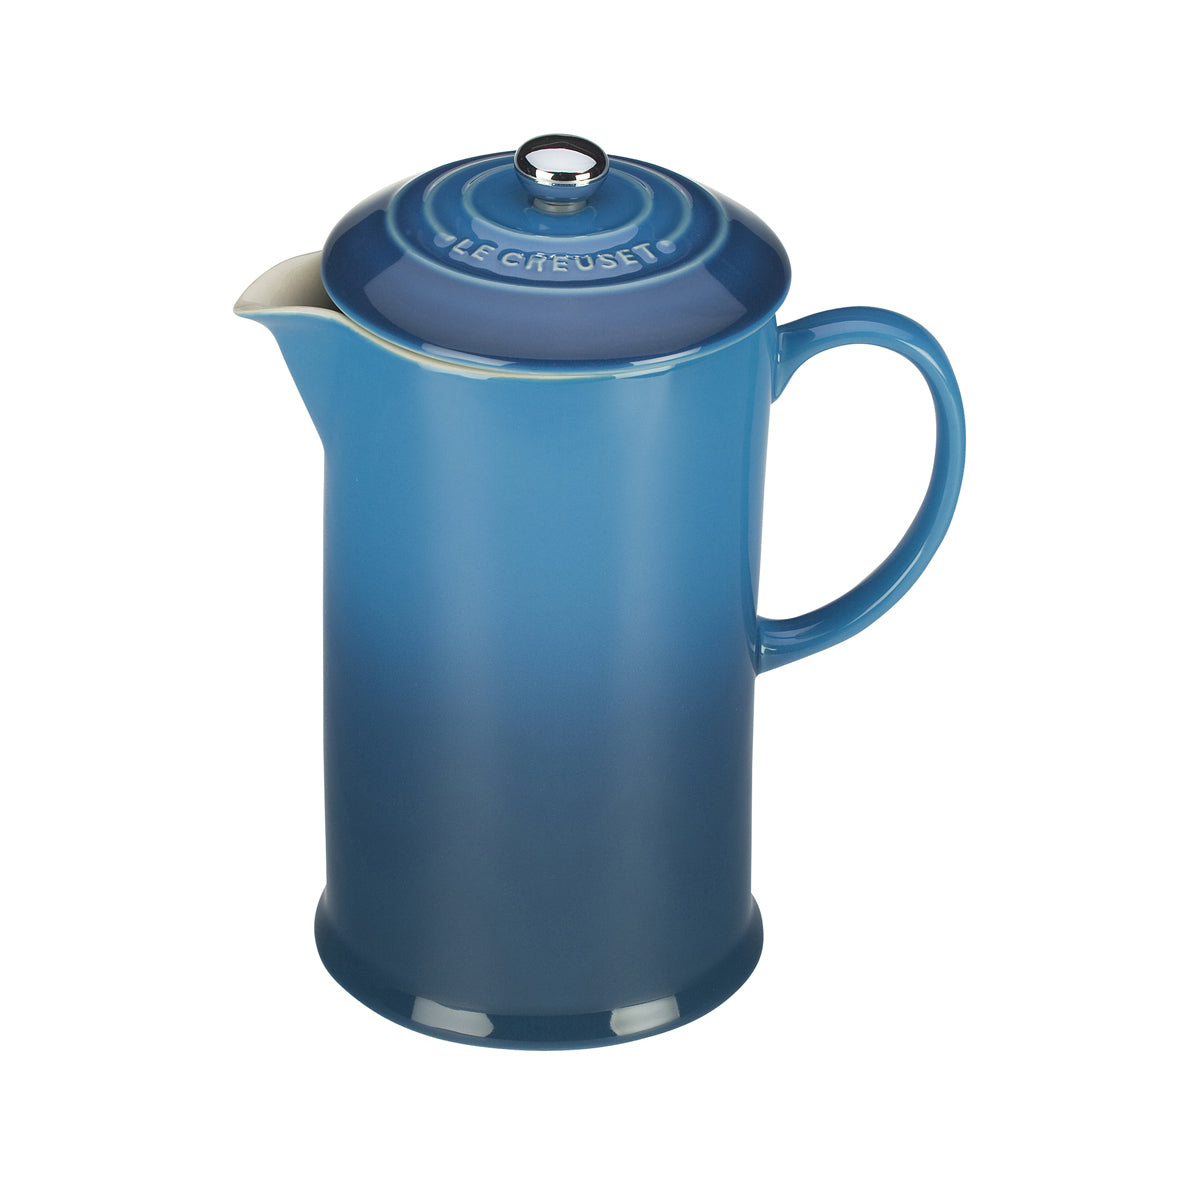 Le Creuset 27 oz. French Press in Marseille